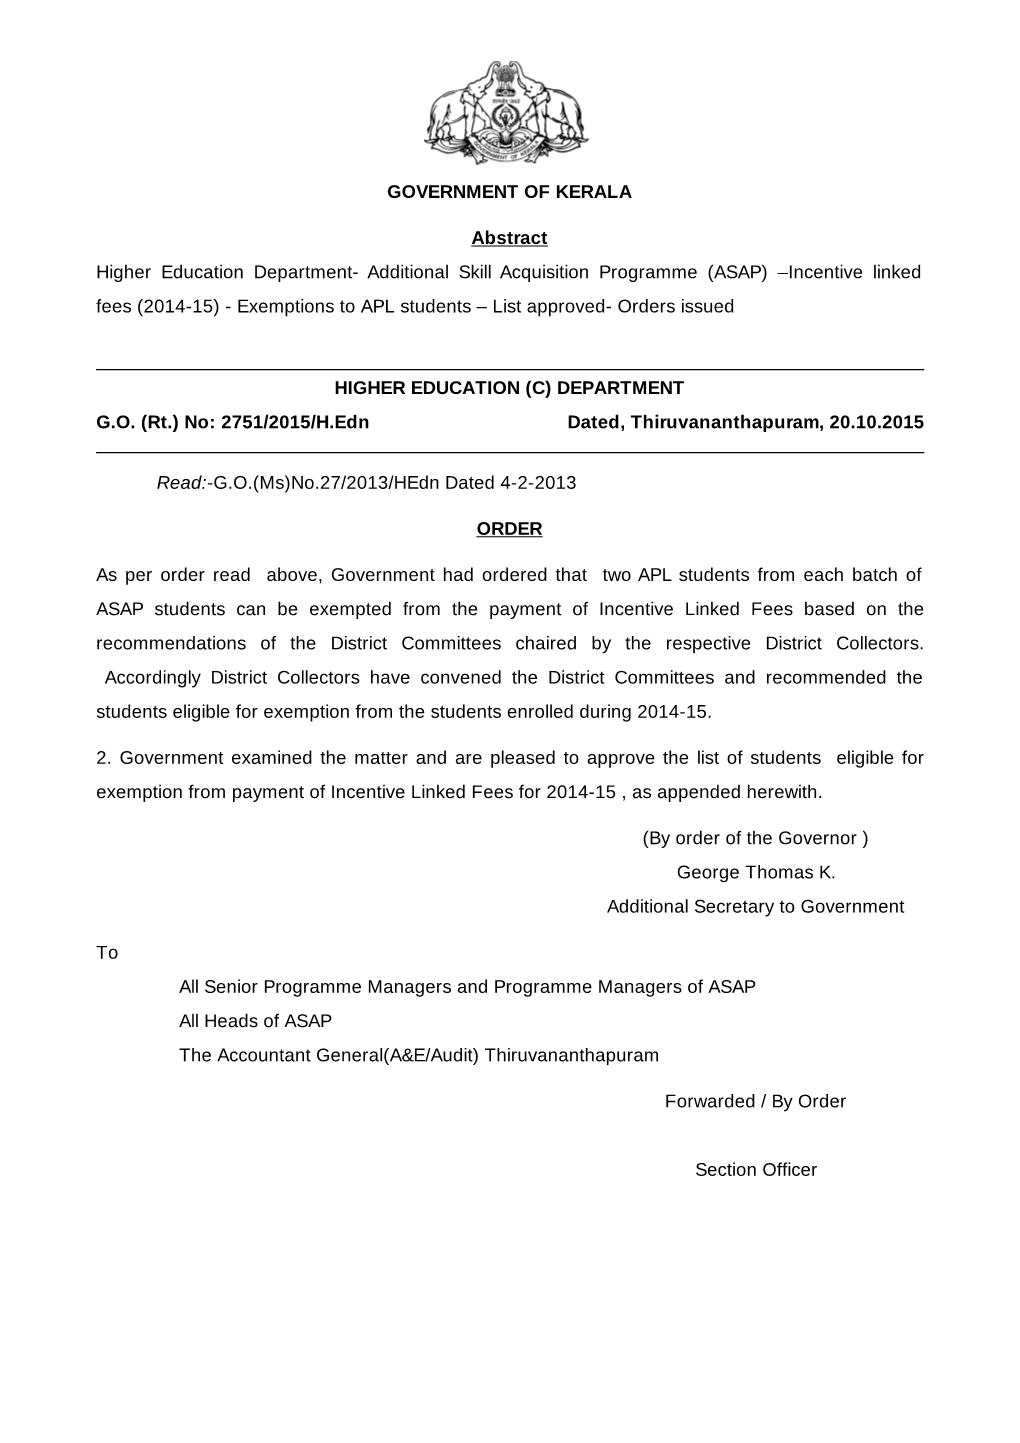 (2014-15) - Exemptions to APL Students – List Approved- Orders Issued